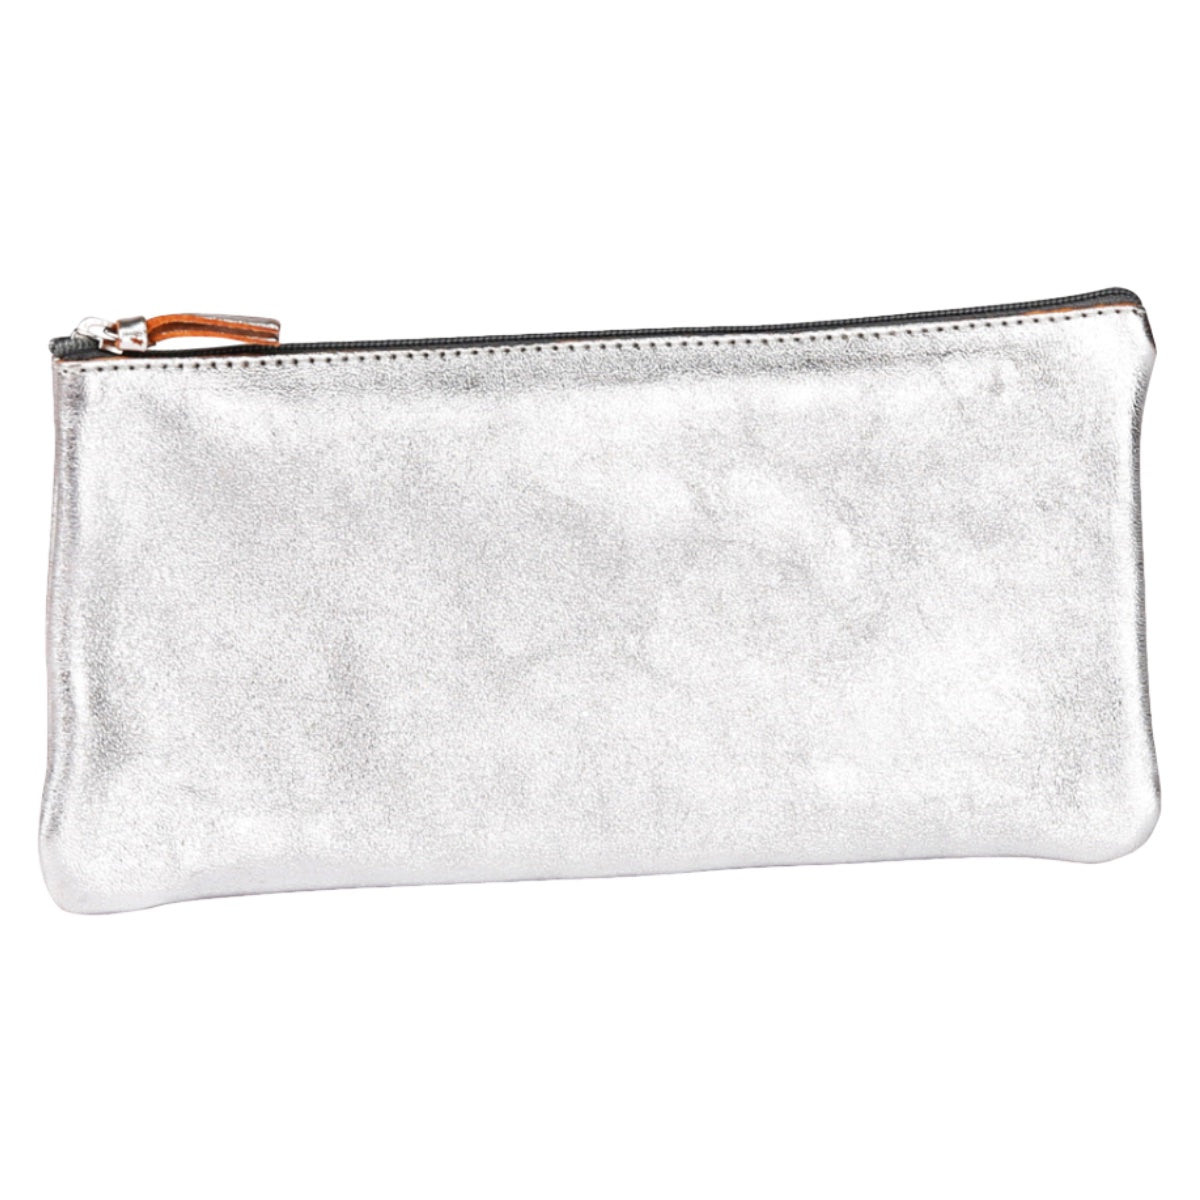 Clairefontaine Leather Flat Pencil Case, Silver